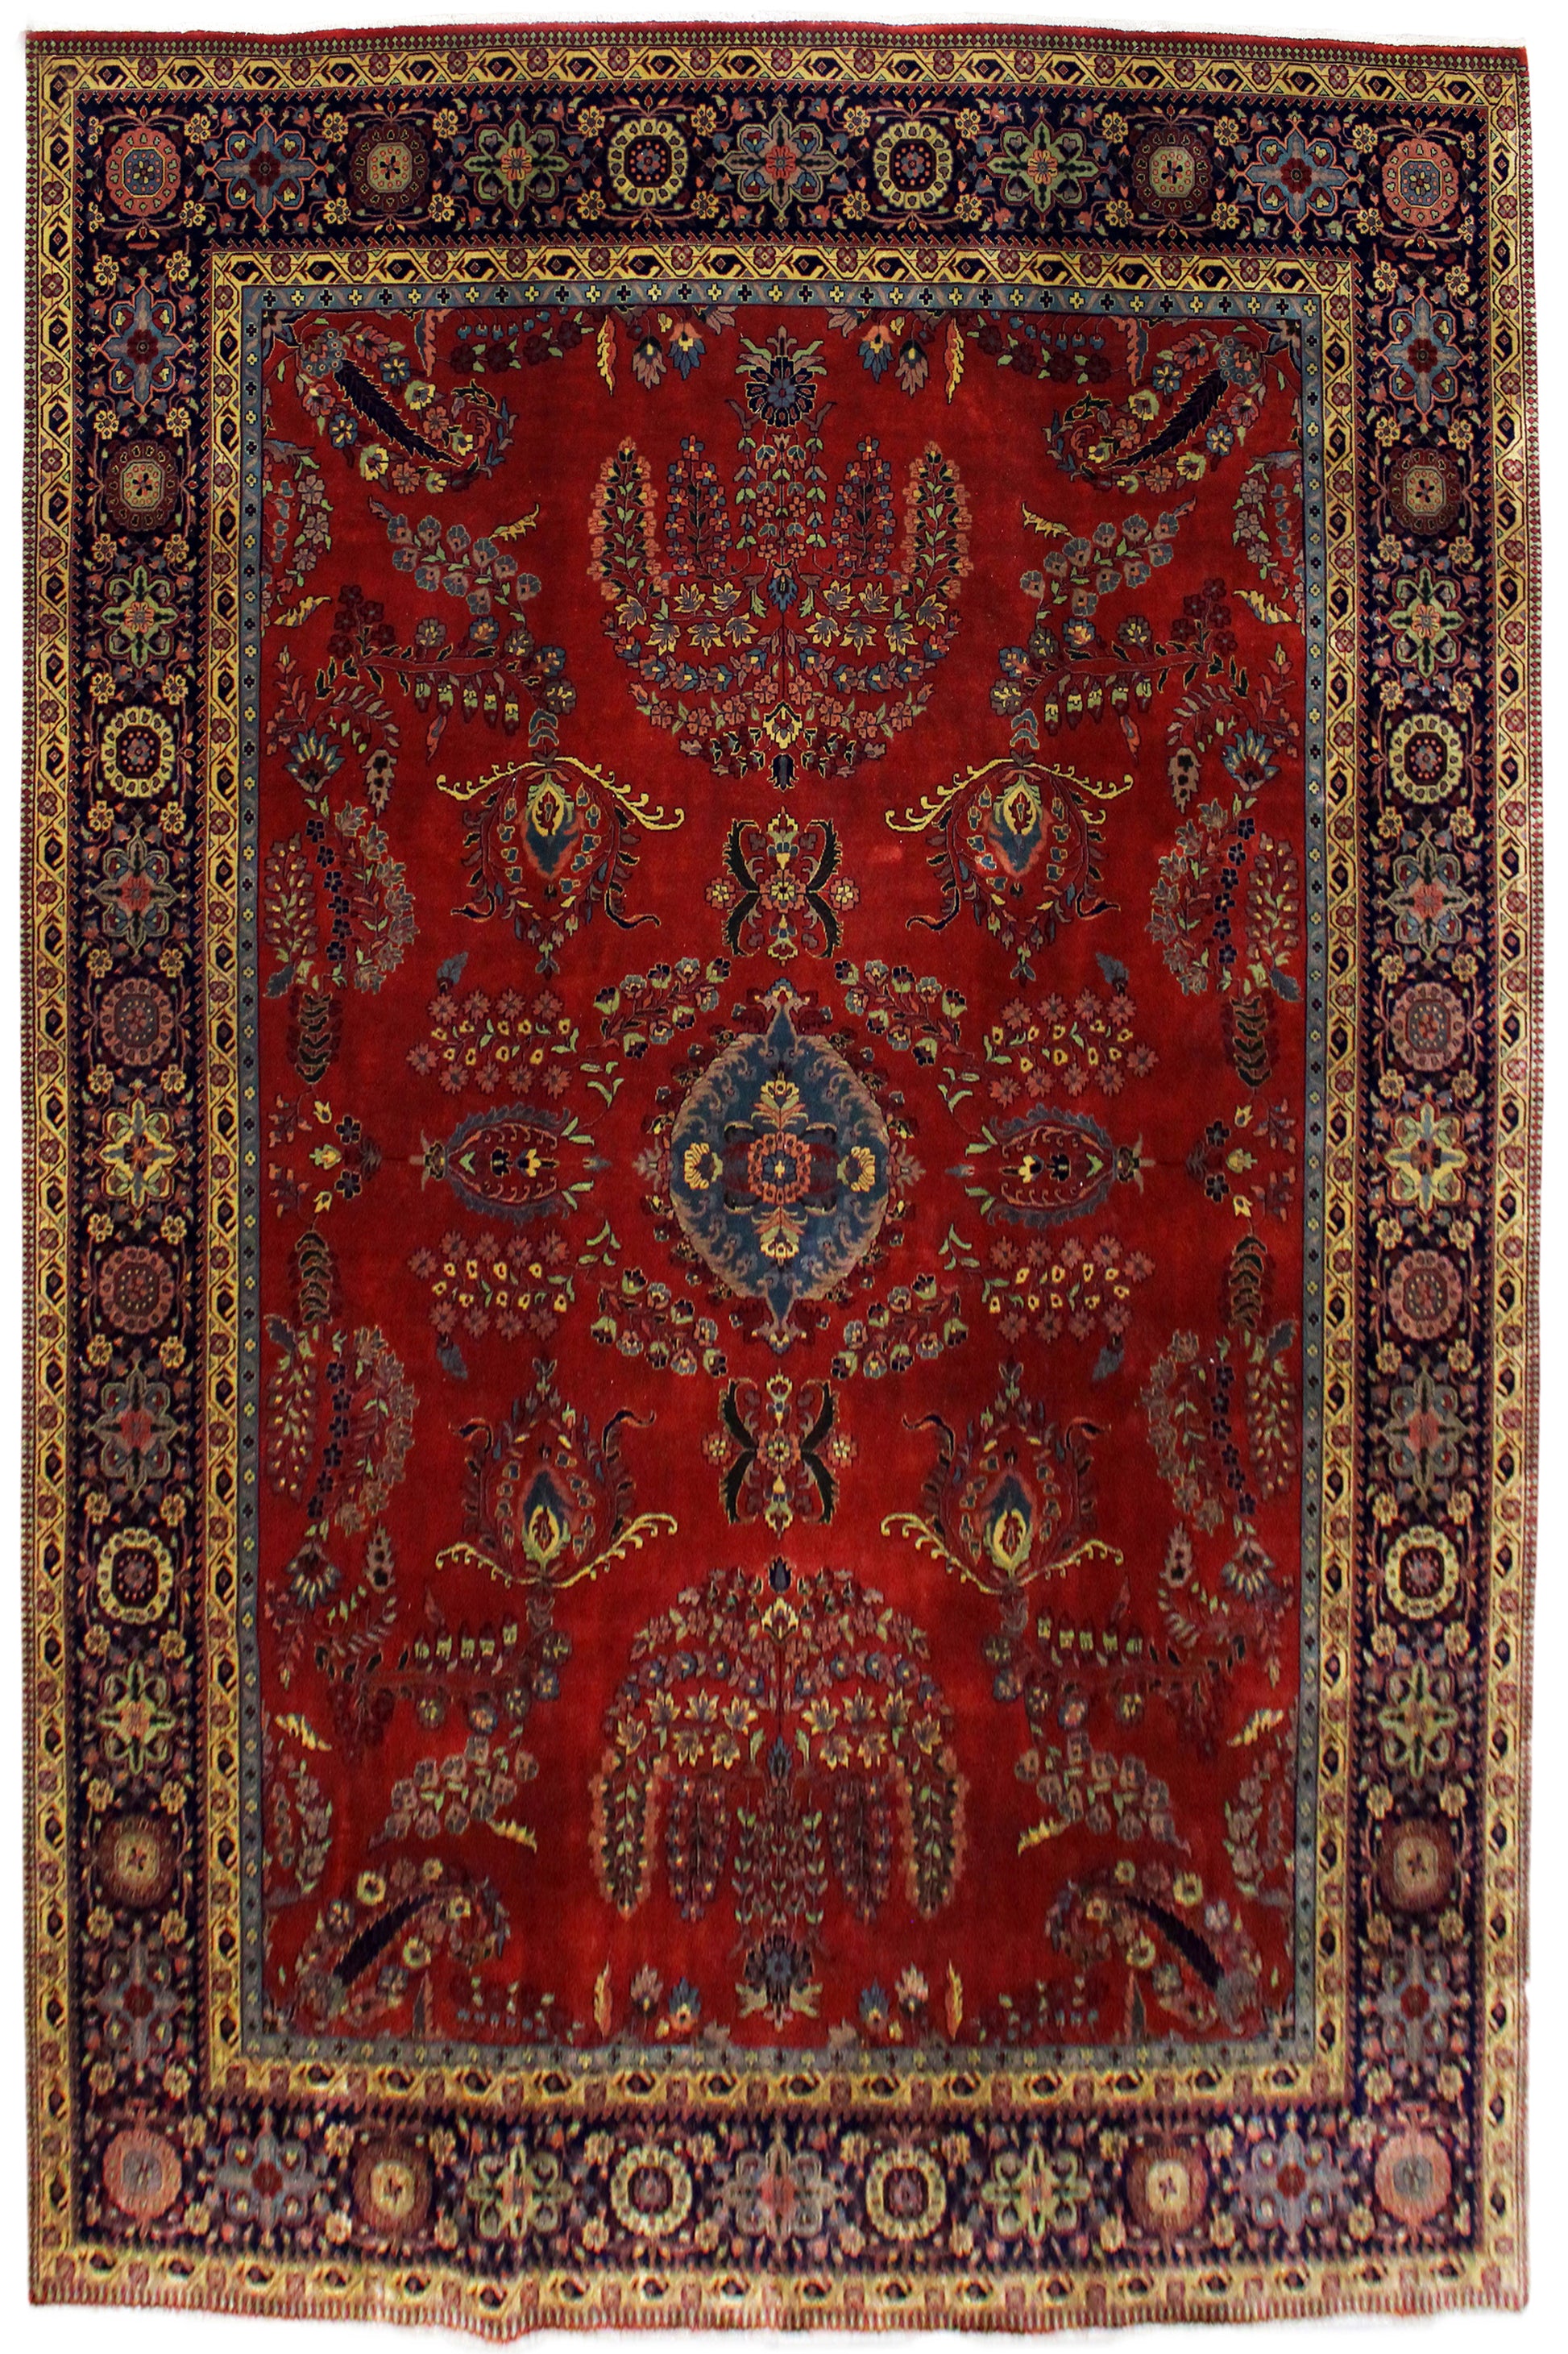 Sultanabad Area Rug 365cm x 275cm